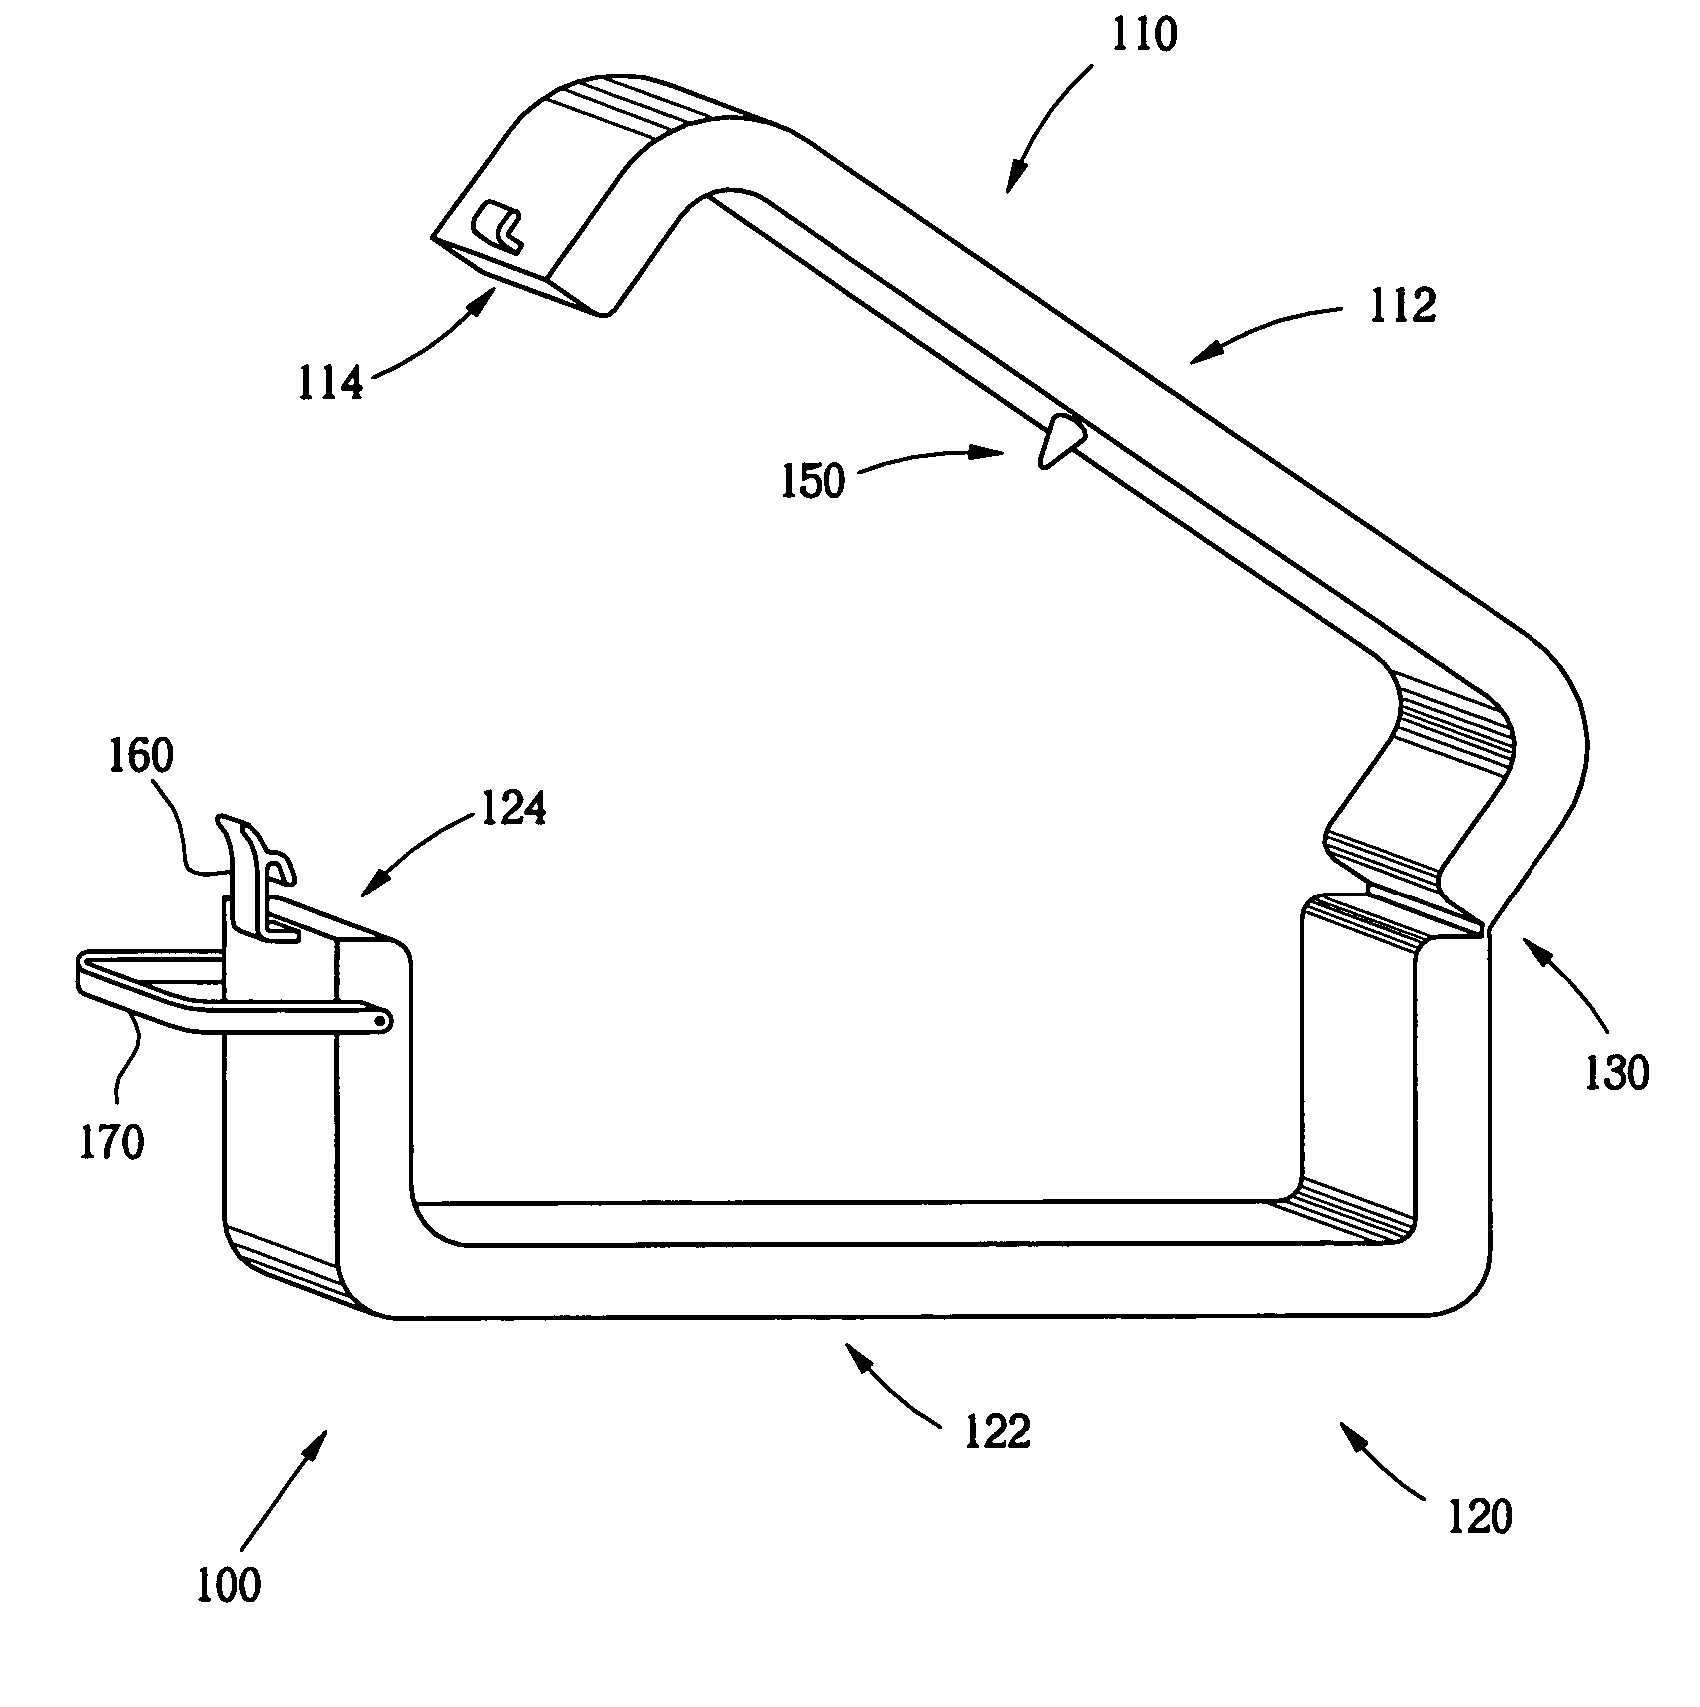 Safety cone holder device